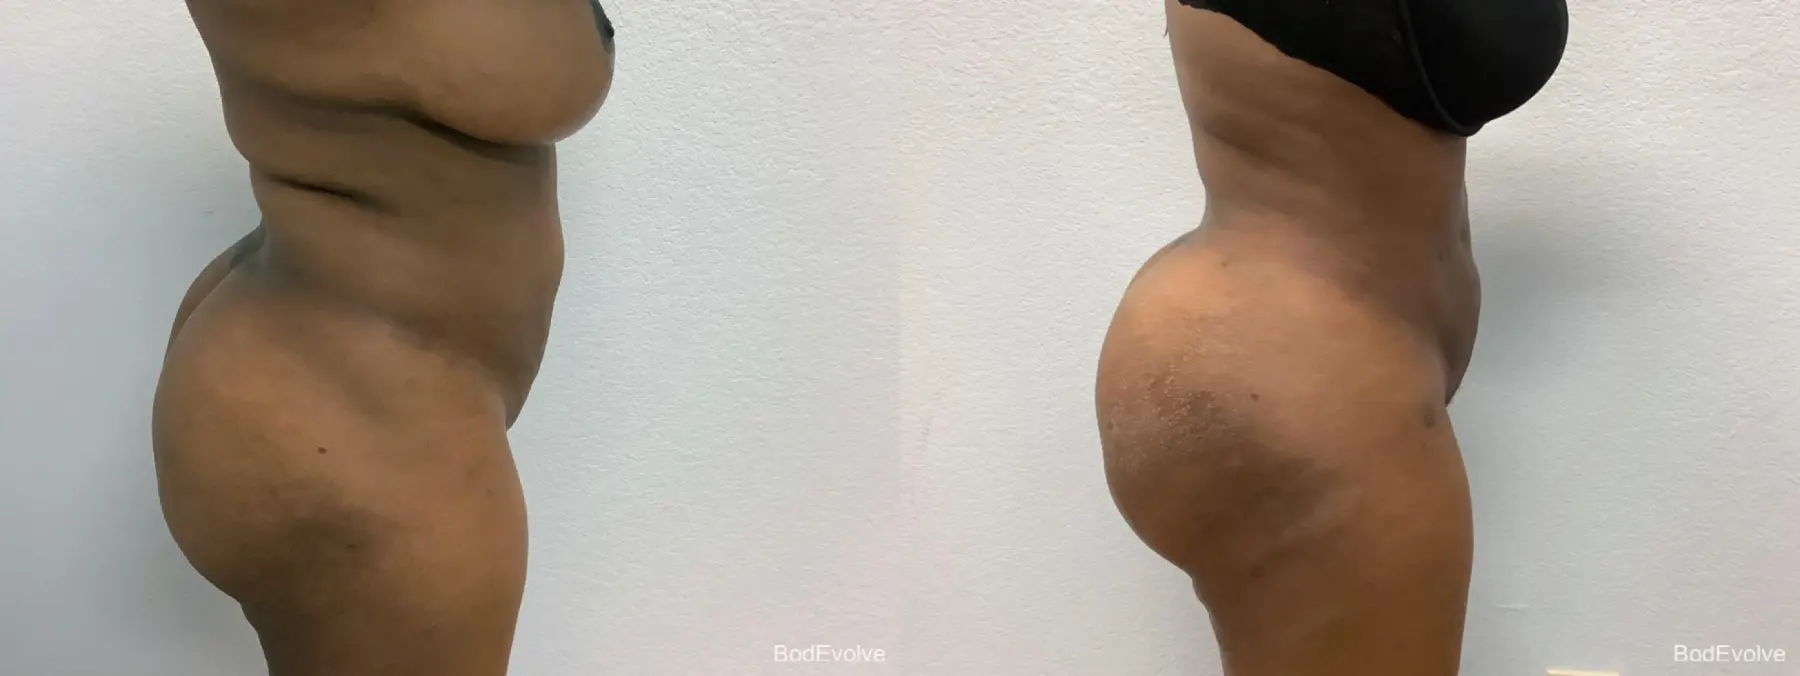 Brazilian Butt Lift: Patient 2 - Before and After 2